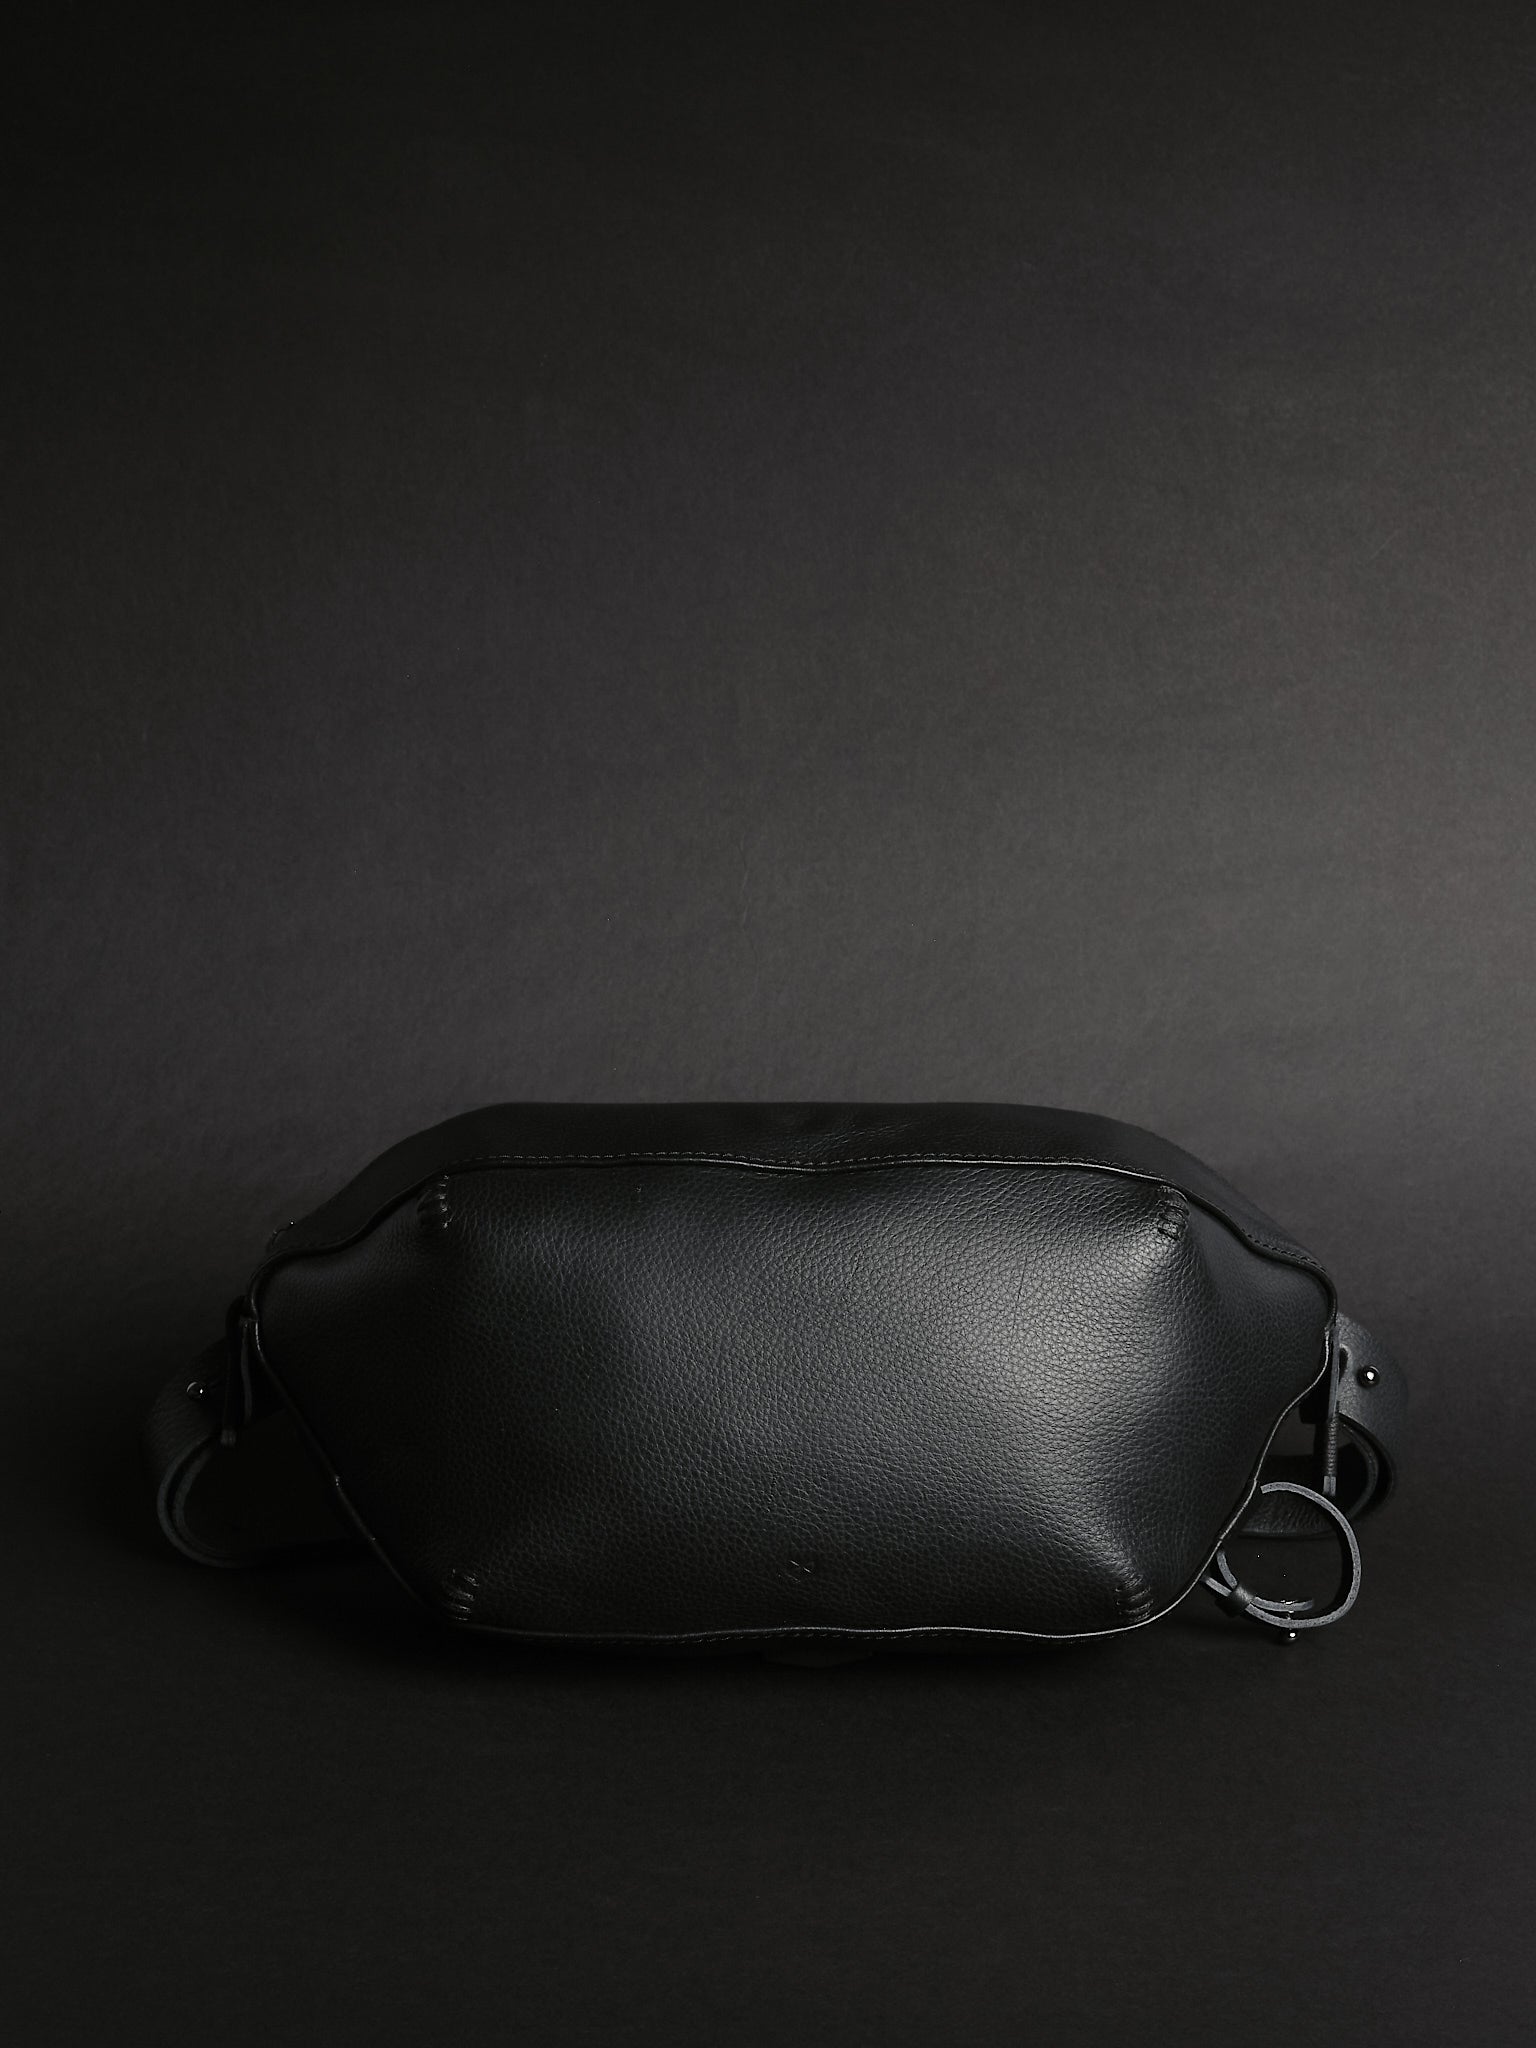 Small Fanny Pack. Mens Sling Bag Black by Capra Leather